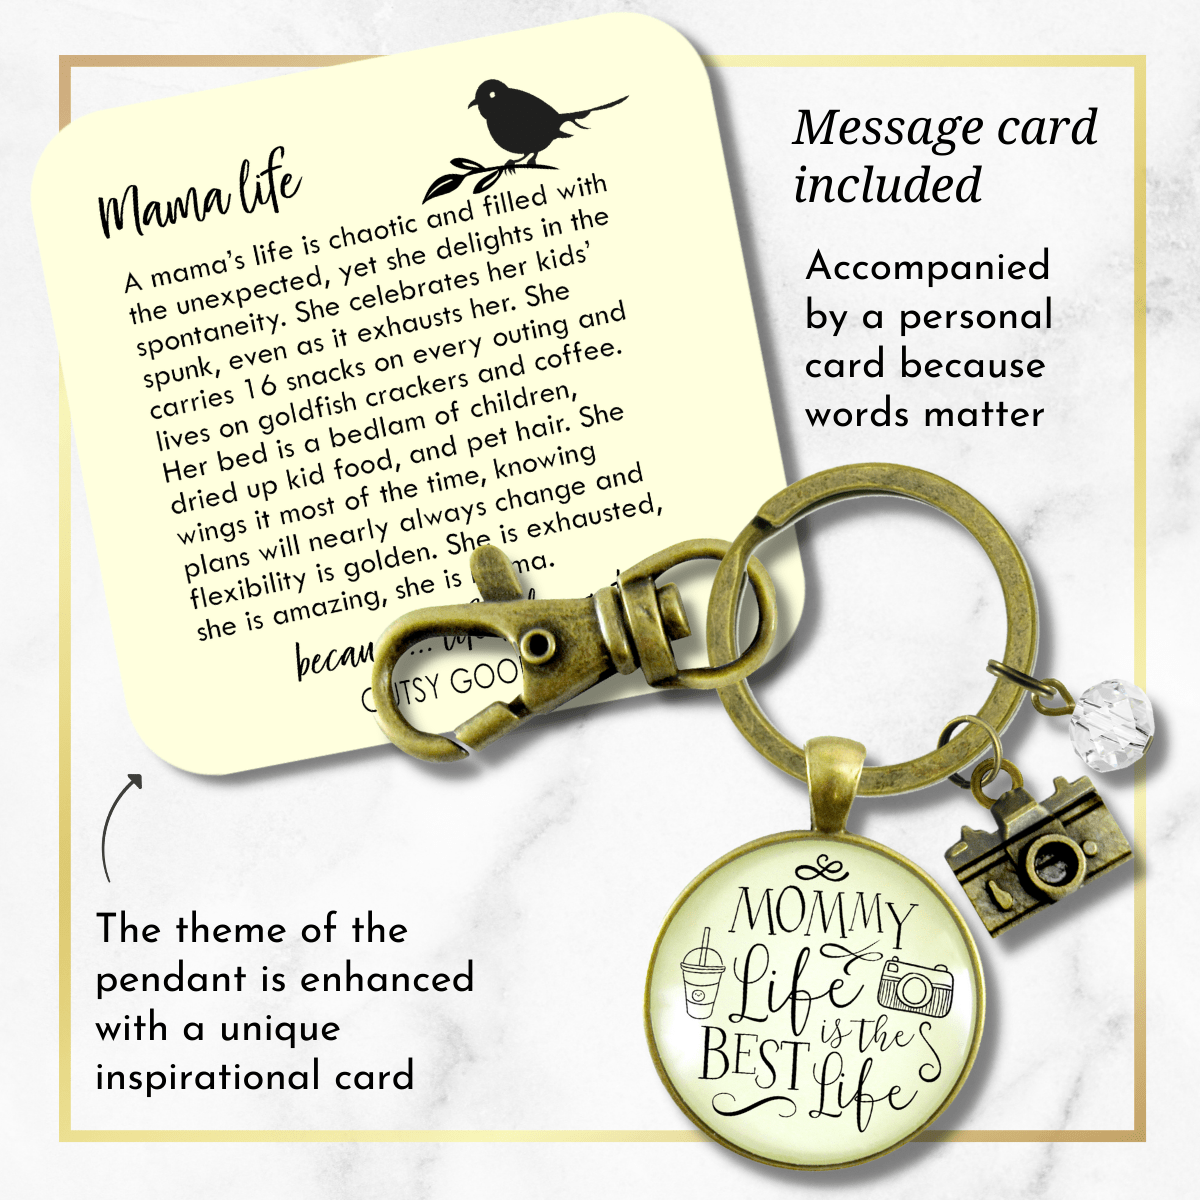 Mom Jewelry Mommy Life Is The Best Life Keychain Rustic Meaningful Camera Charm - Gutsy Goodness Handmade Jewelry;Mom Jewelry Mommy Life Is The Best Life Keychain Rustic Meaningful Camera Charm - Gutsy Goodness Handmade Jewelry Gifts